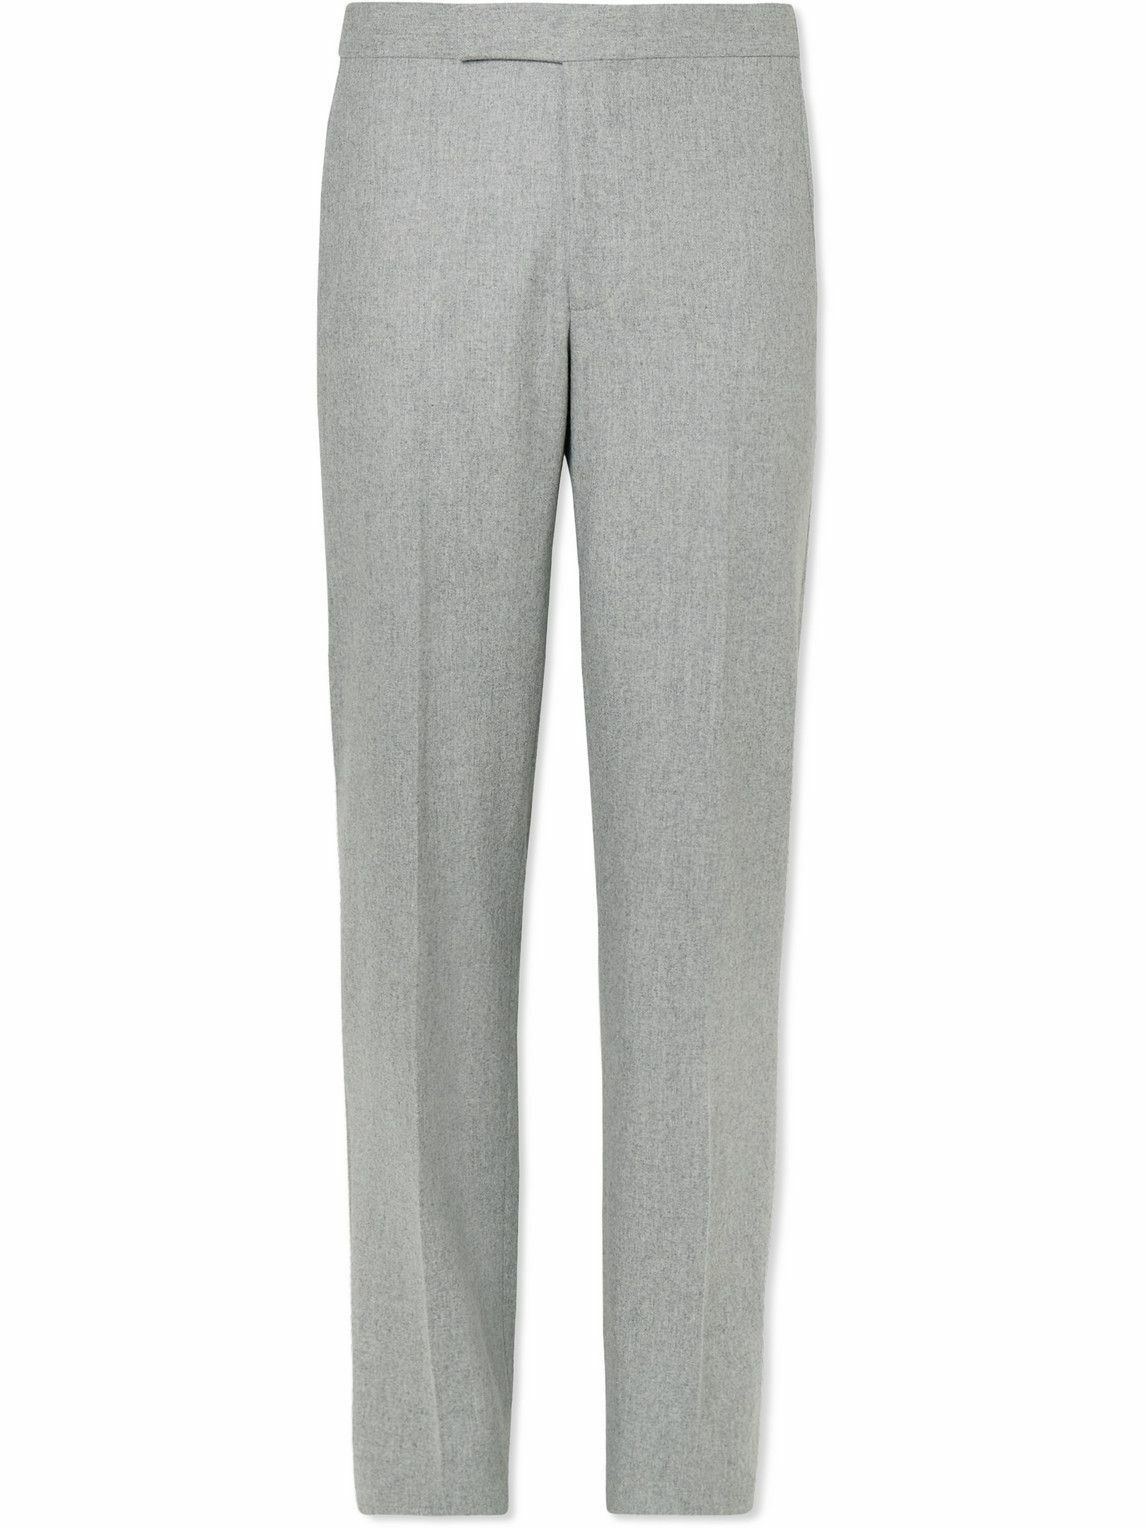 Richard James - Tapered Wool Flannel Suit Trousers - Gray Richard James